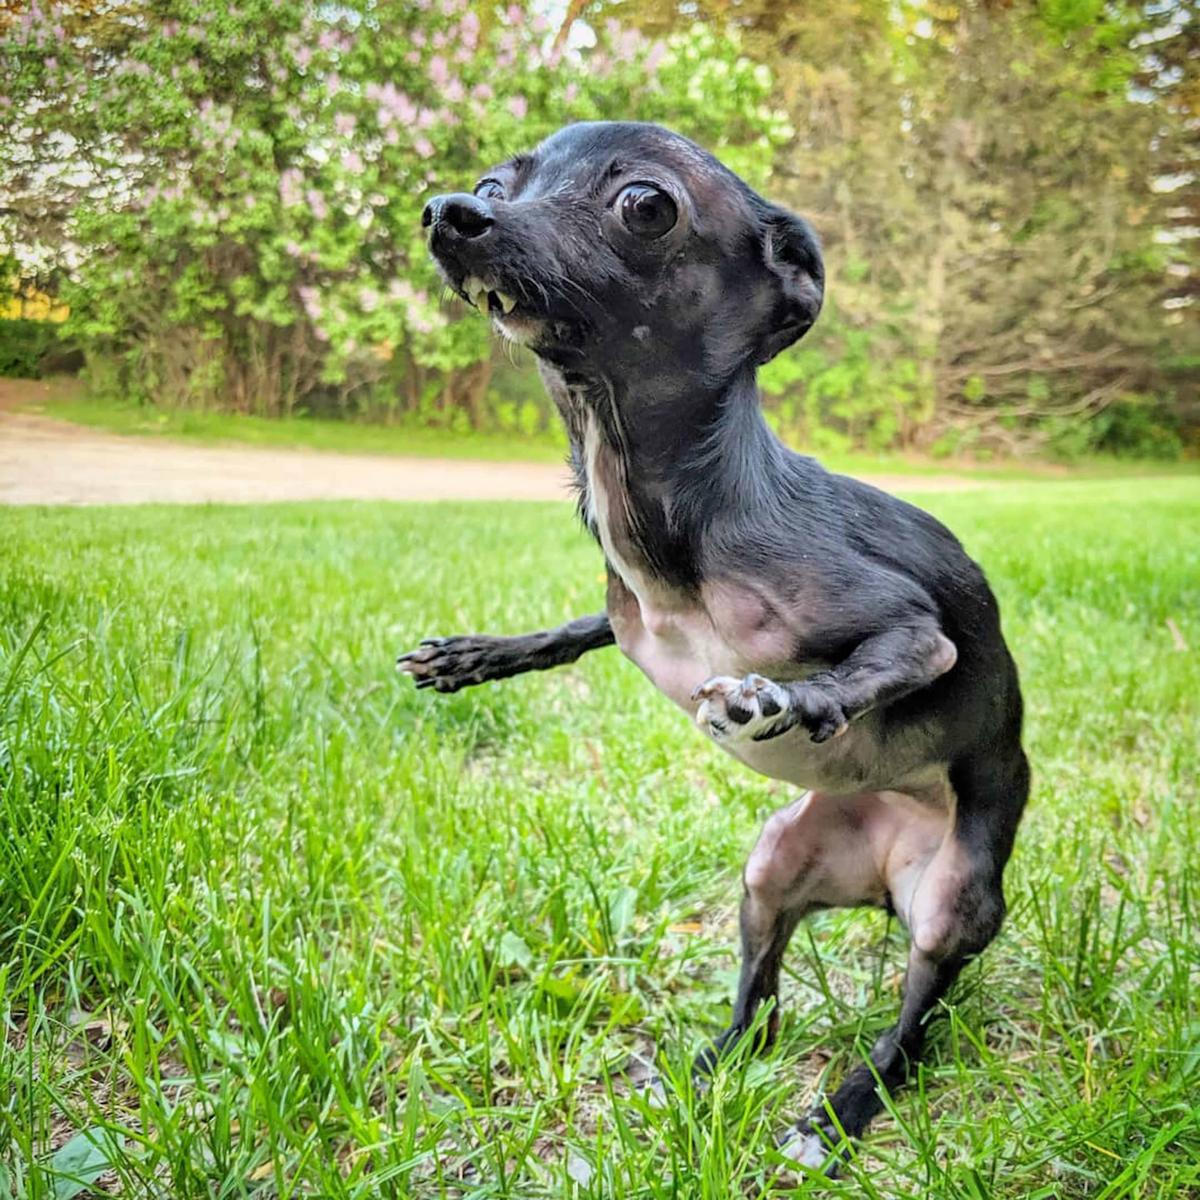 A gawky dog with a birth defect and two permanently broken legs that was abandoned is now living a happy life thanks to her loving new owner. (Caters News)